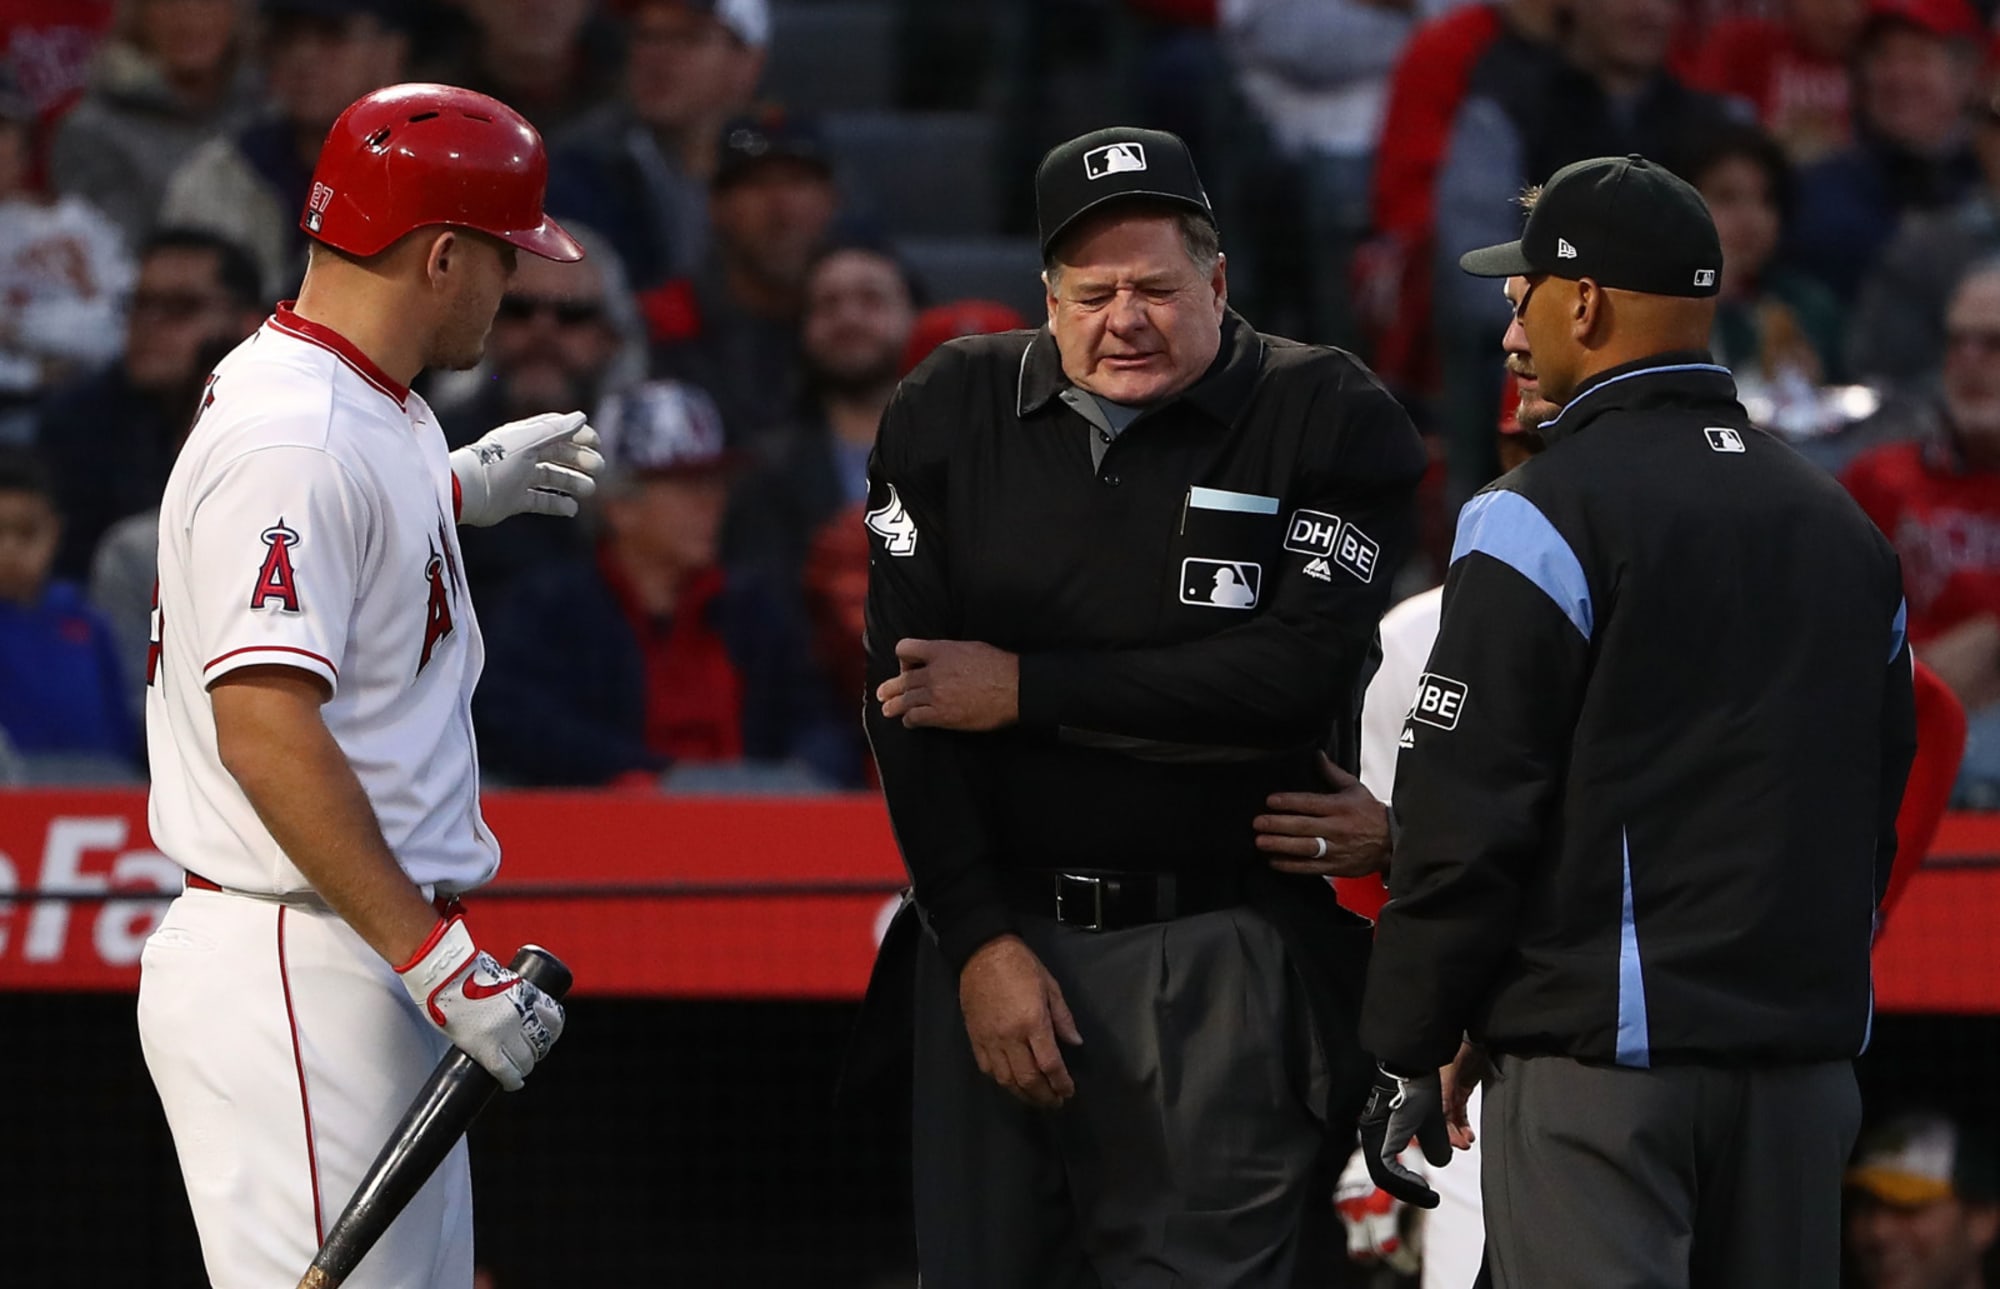 MLB umpires have a different strike zone in extra innings